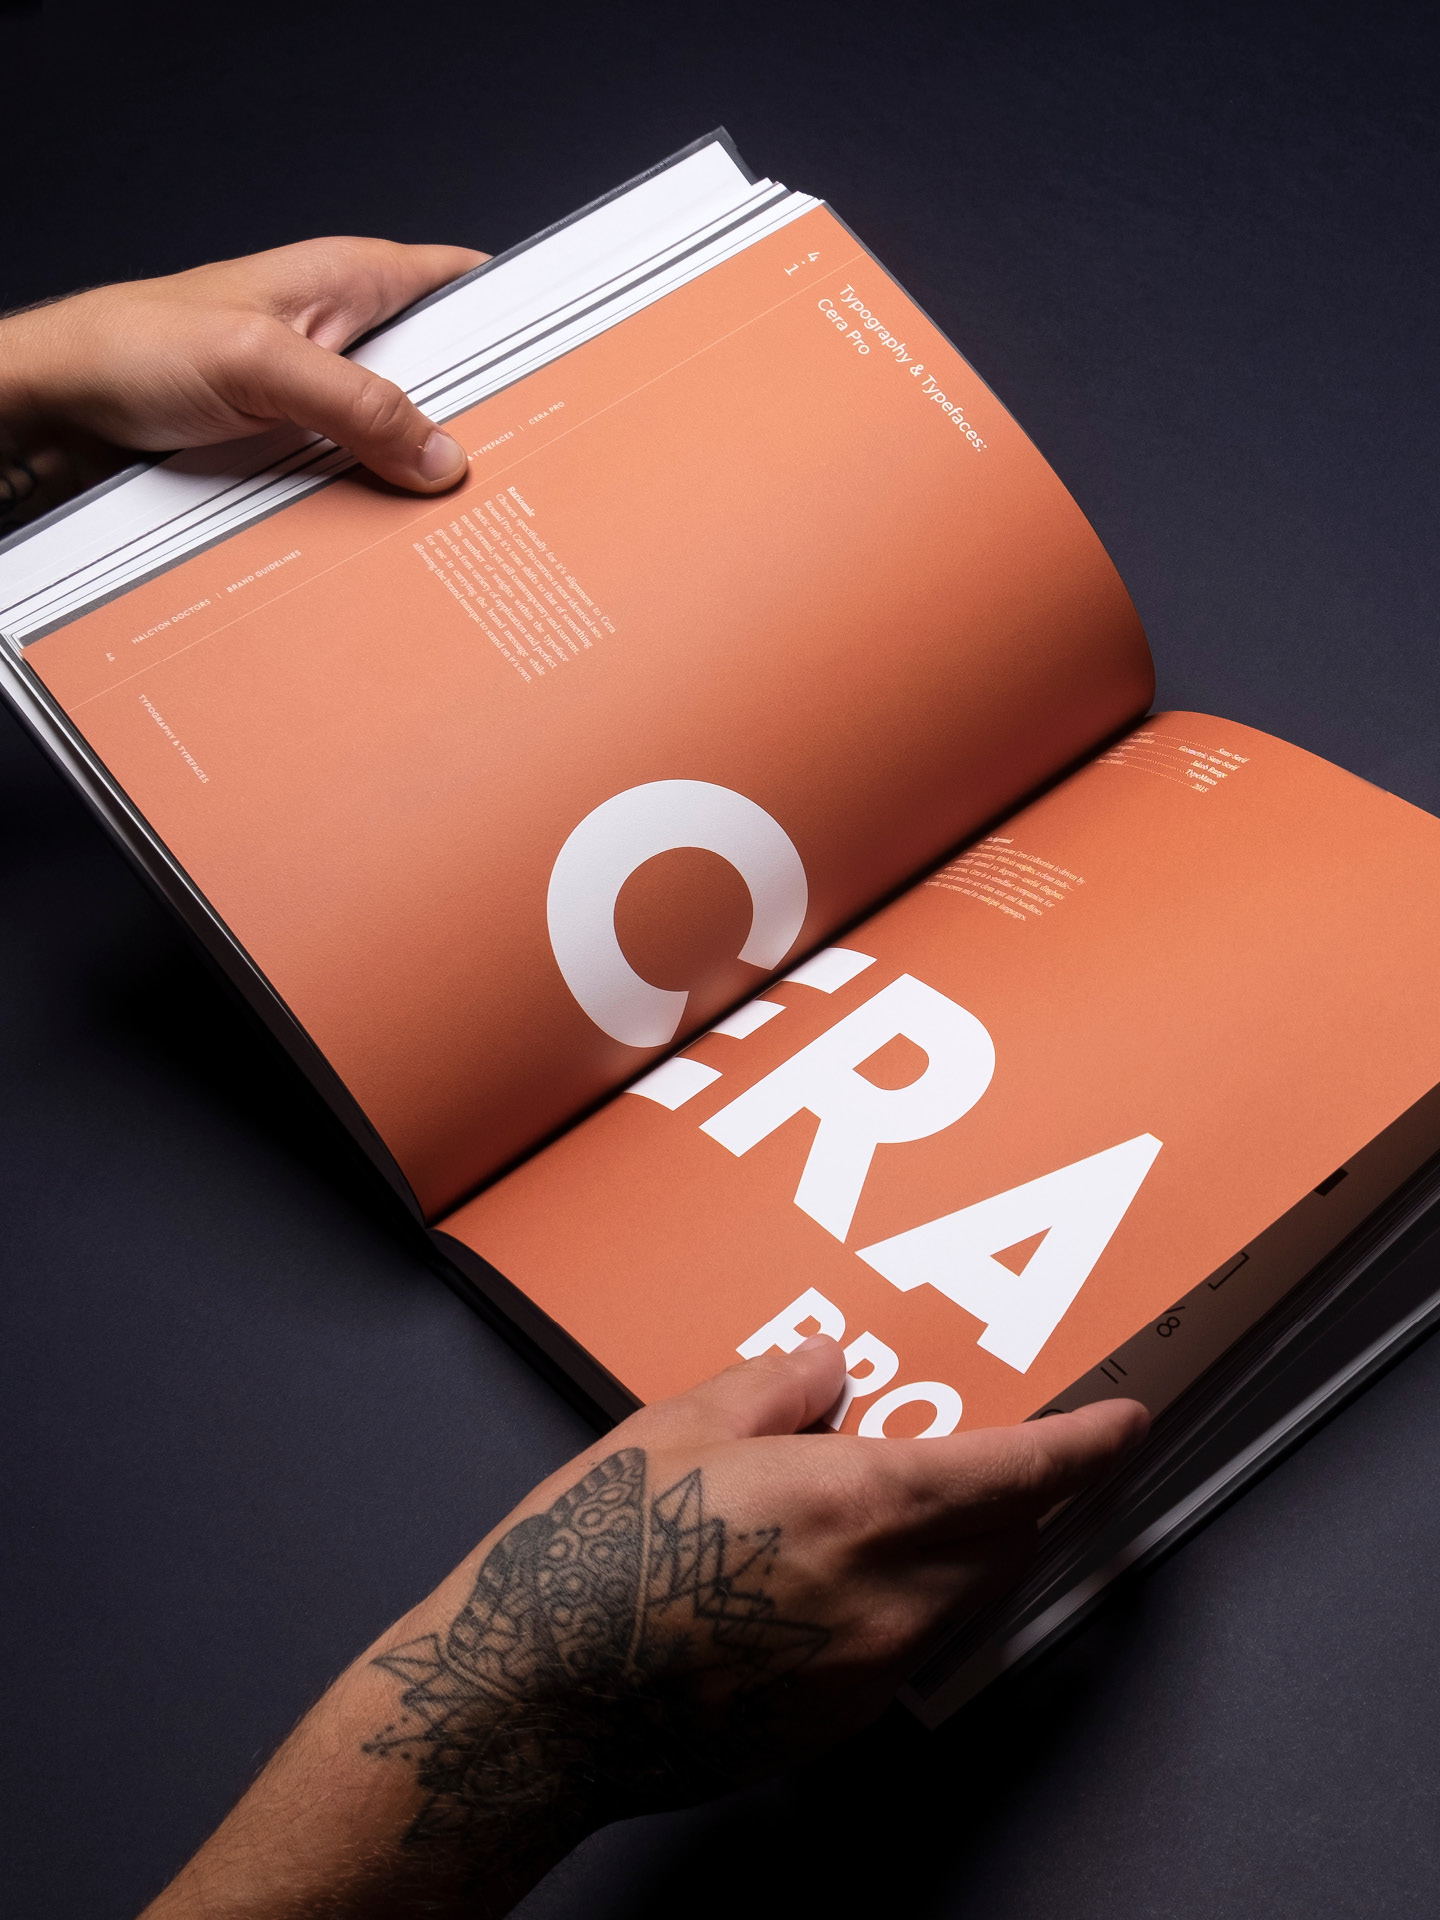 A printed spread from the Halcyon Doctors brand guidelines showcasing the Cera Pro typeface